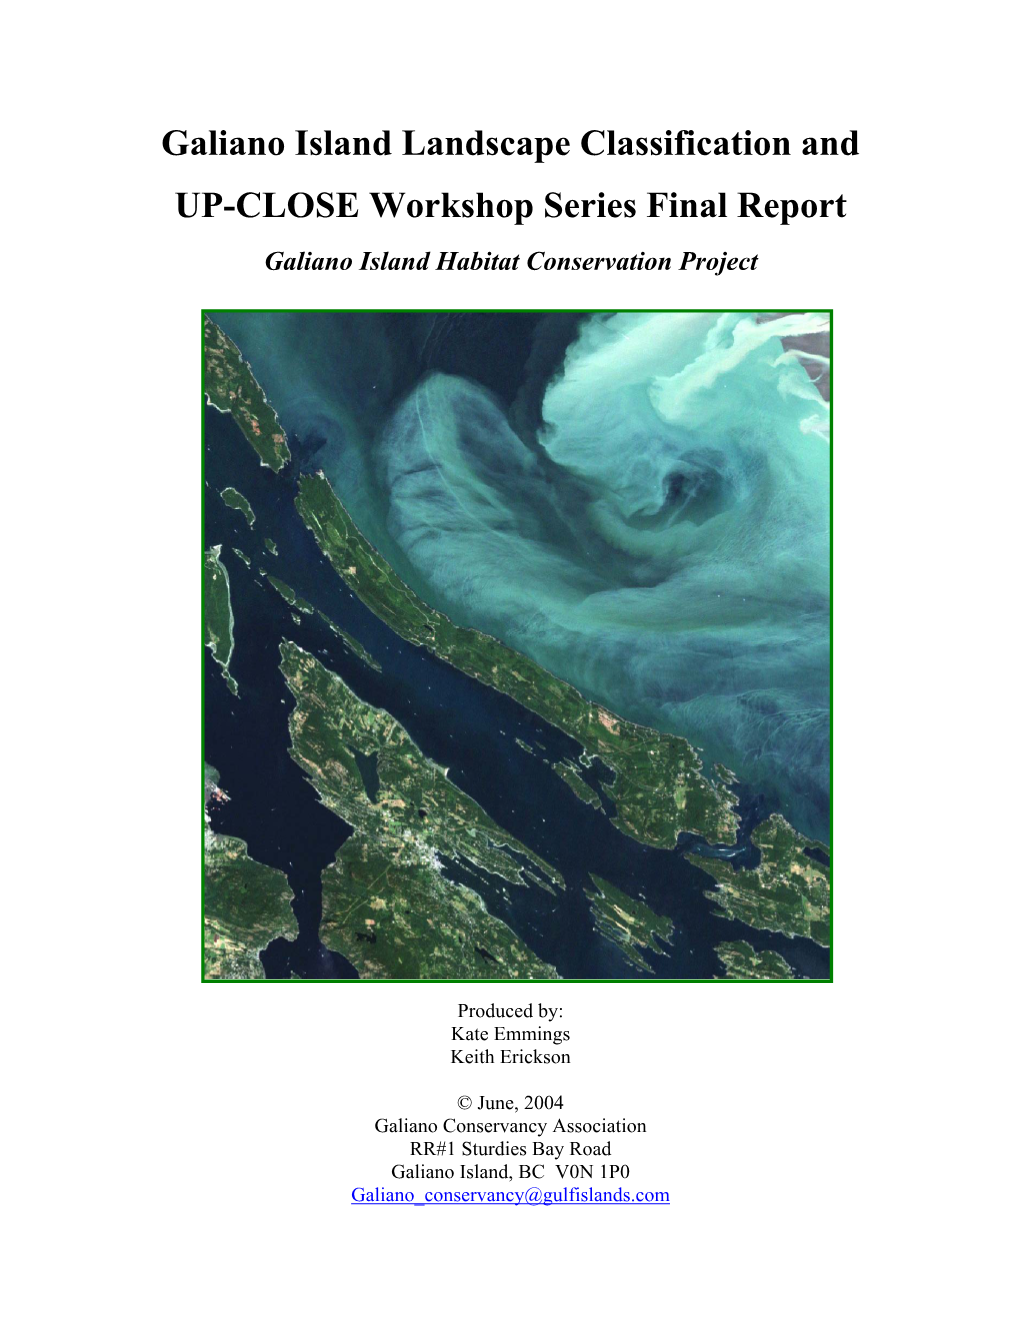 Galiano Island Landscape Classification and UP-CLOSE Workshop Series Final Report Galiano Island Habitat Conservation Project